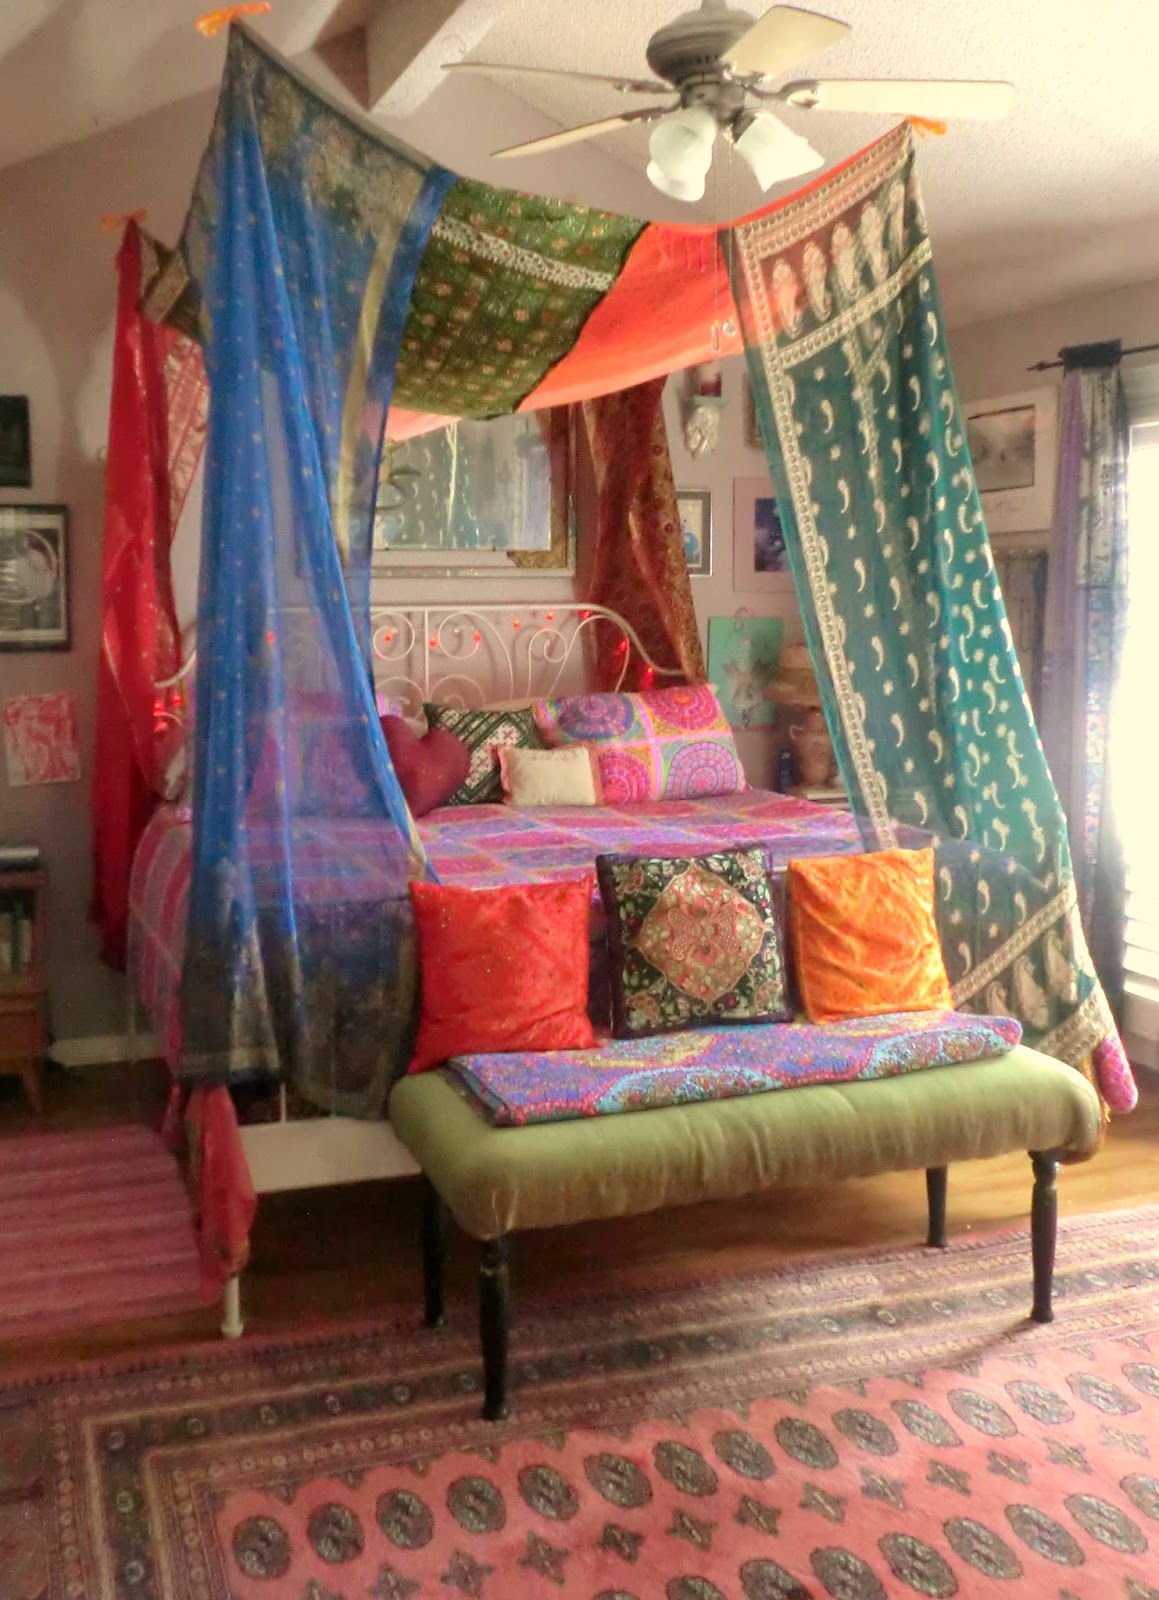 do ya'll think? Can you imagine your bed swathed in layers of bohemian ...